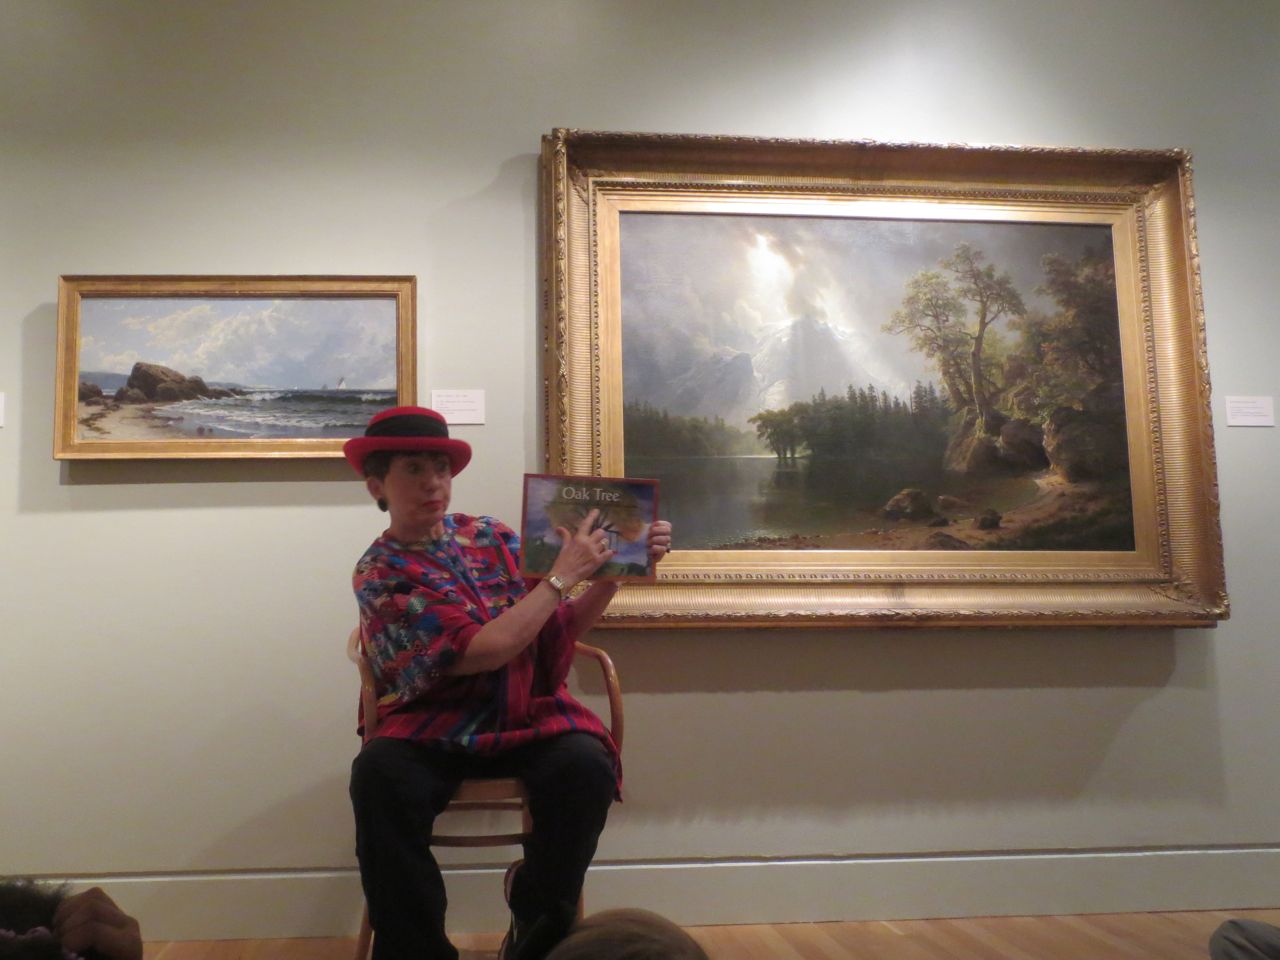 Melody Rose Mollis Lundquist reading her book "Oak Tree" in the American gallery at the San Antonio Museum of Art | San Antonio Charter Moms